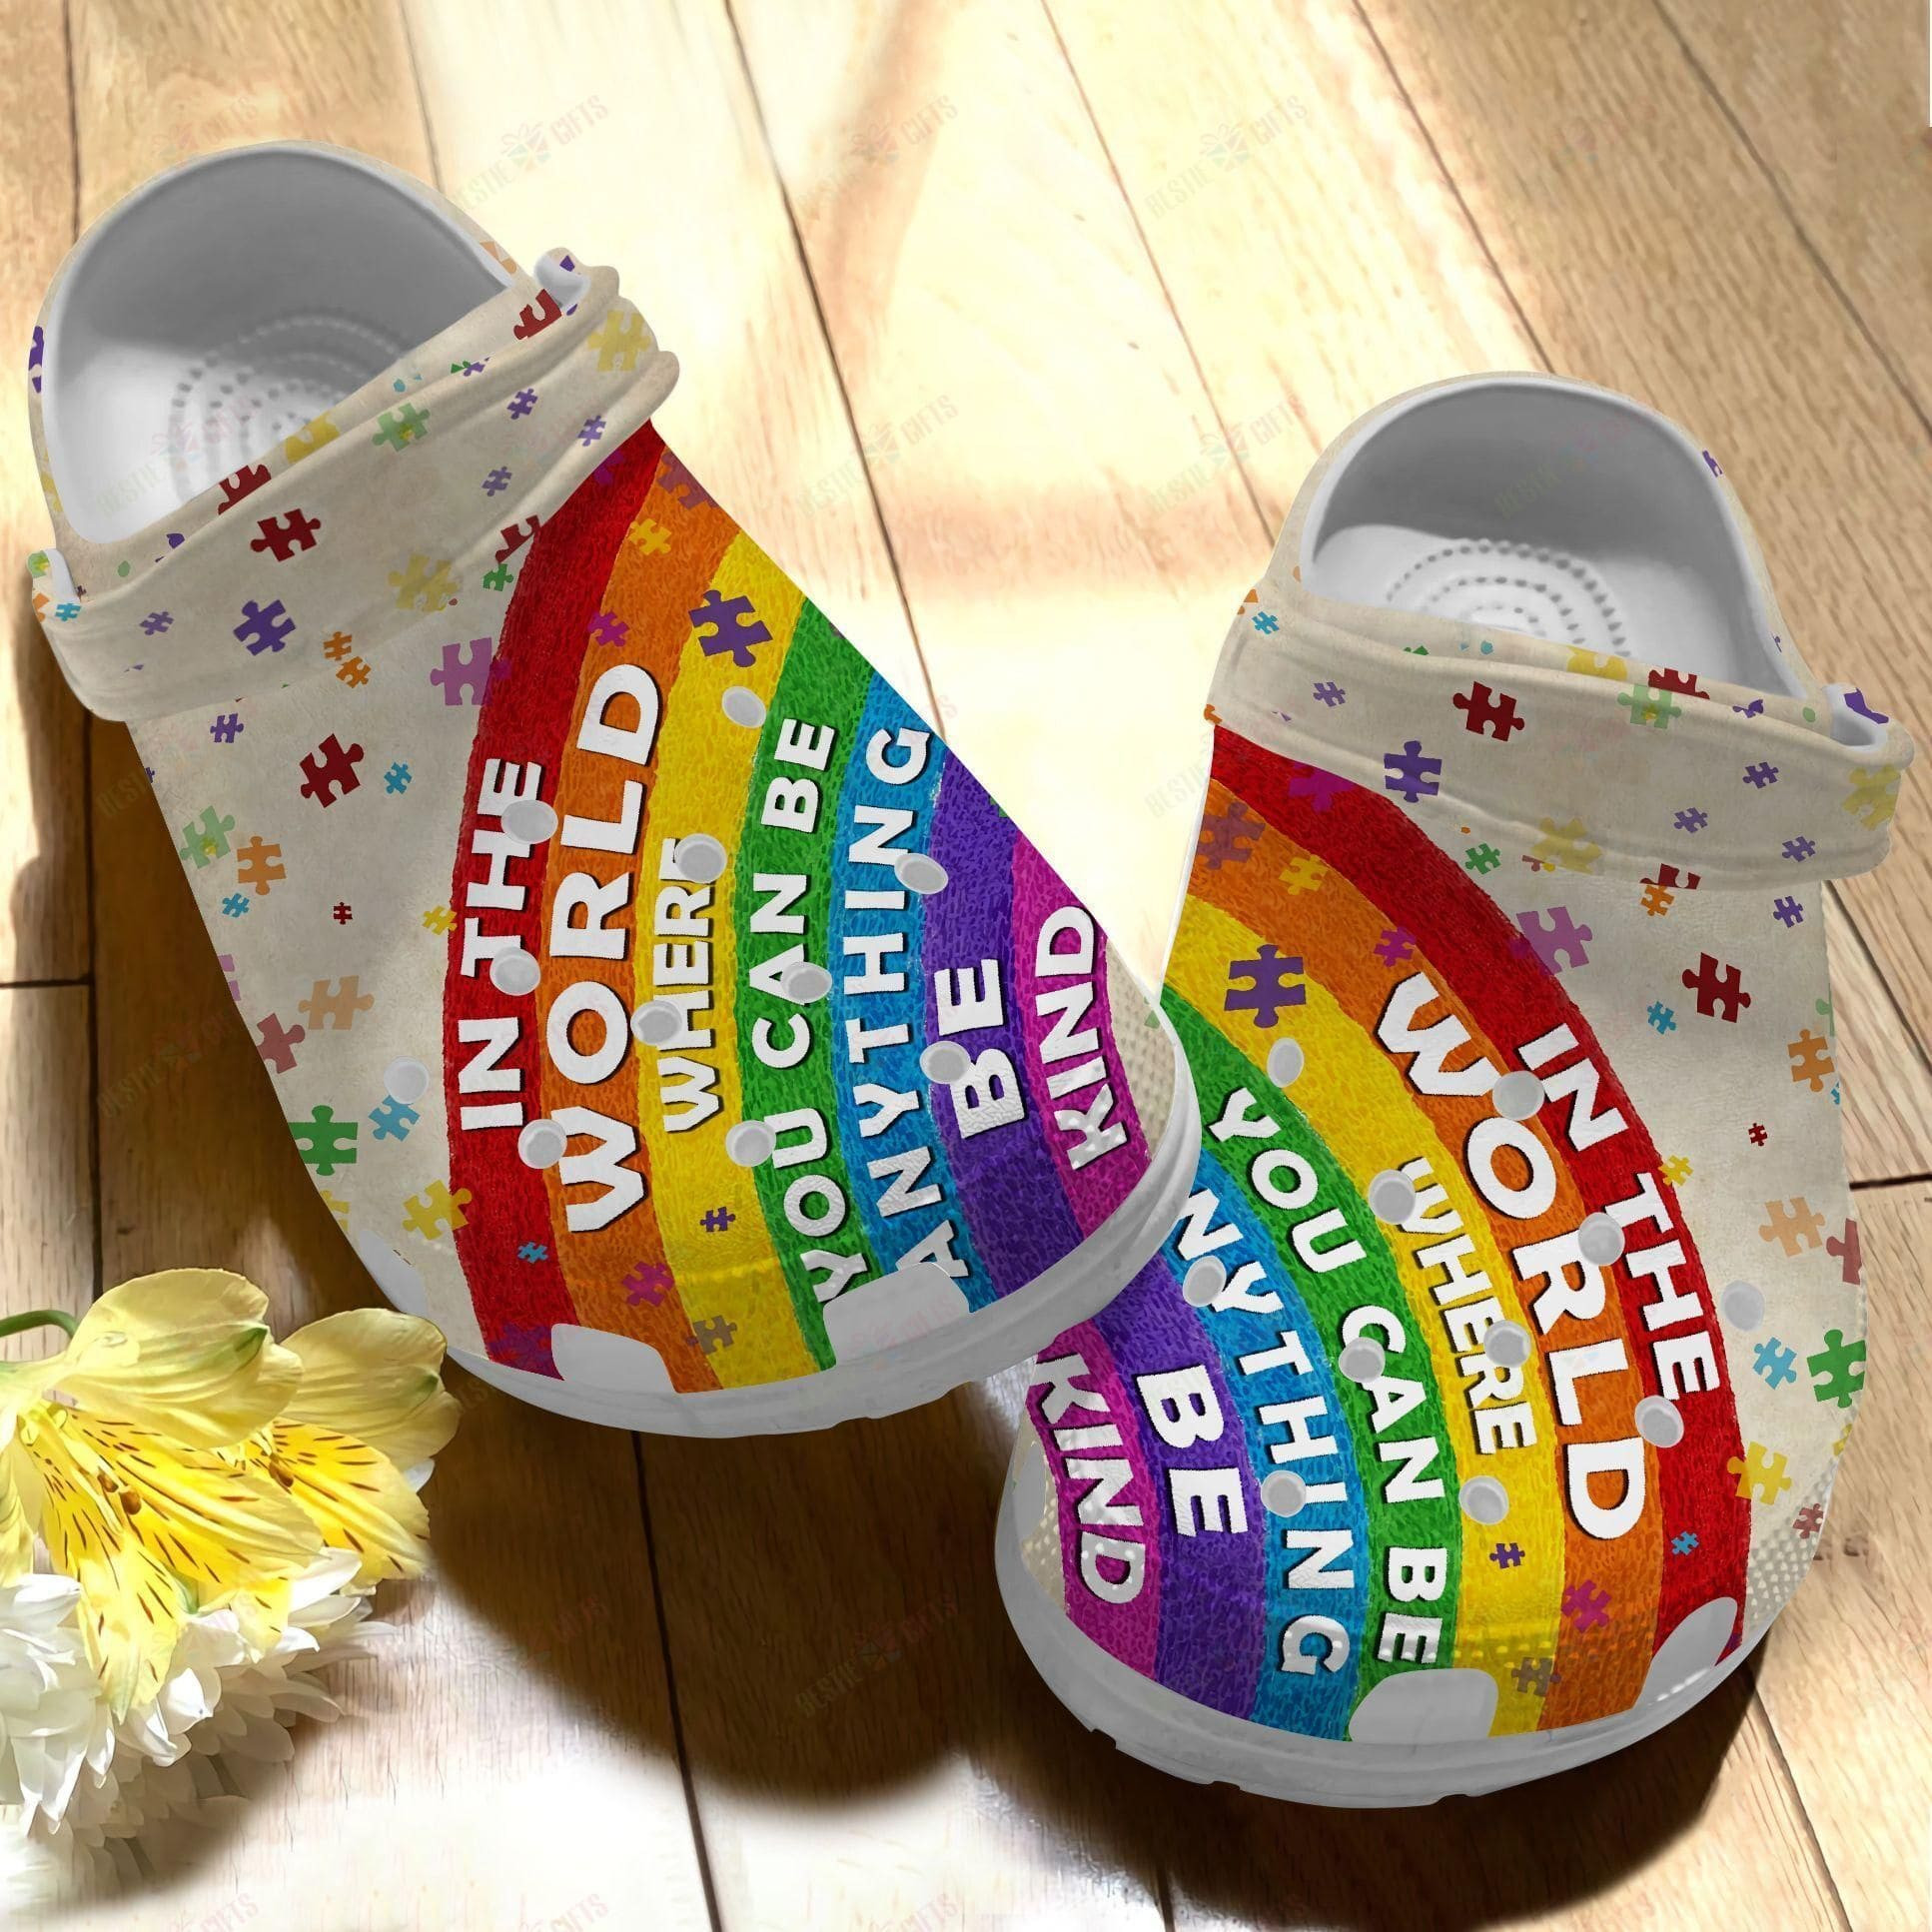 Autism Awareness Crocs Be Kind In This World Crocband Clog Shoes For Men Women